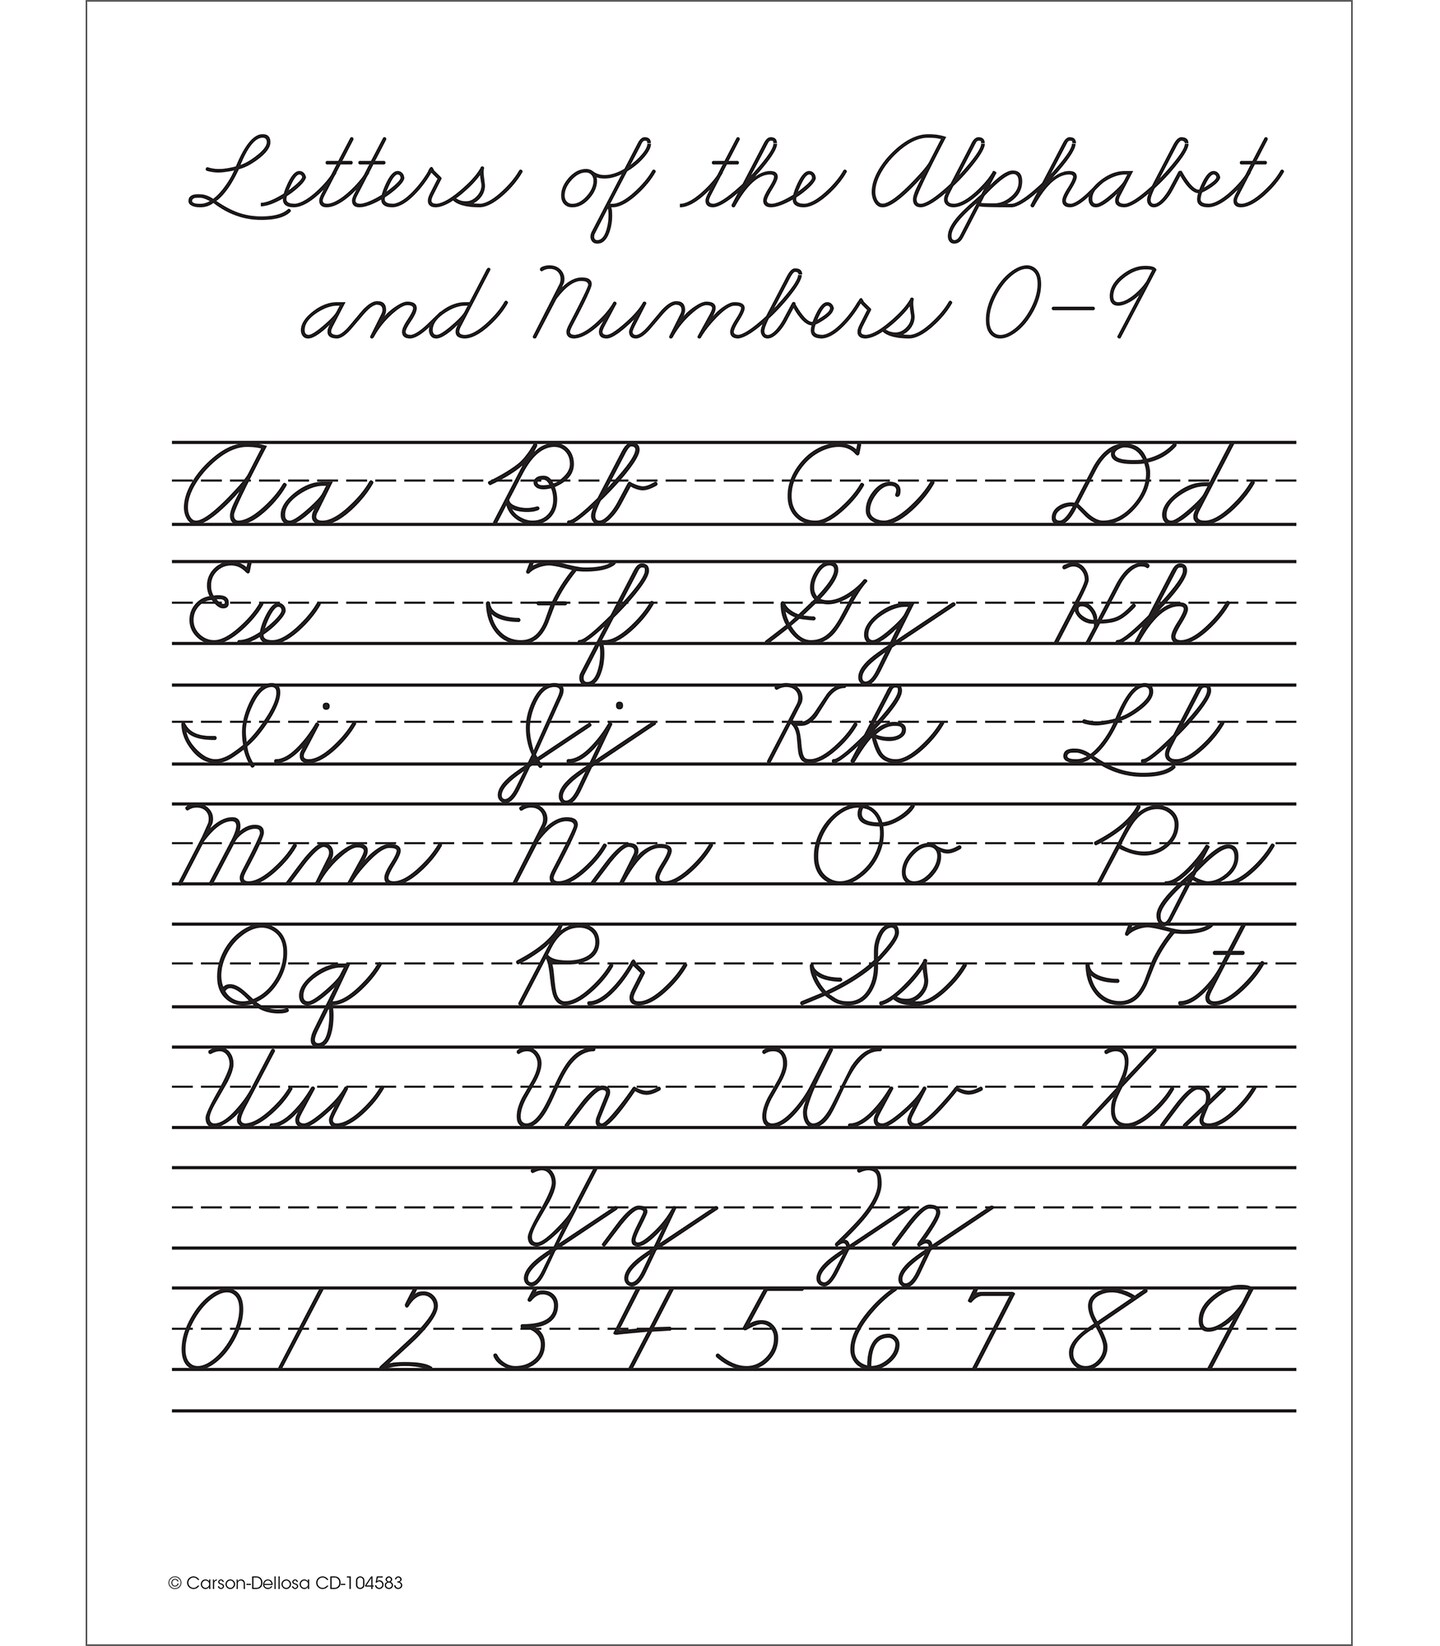 Carson Dellosa Beginning Traditional Cursive Handwriting Workbook for Kids, Handwriting Practice for Cursive Alphabet and Numbers